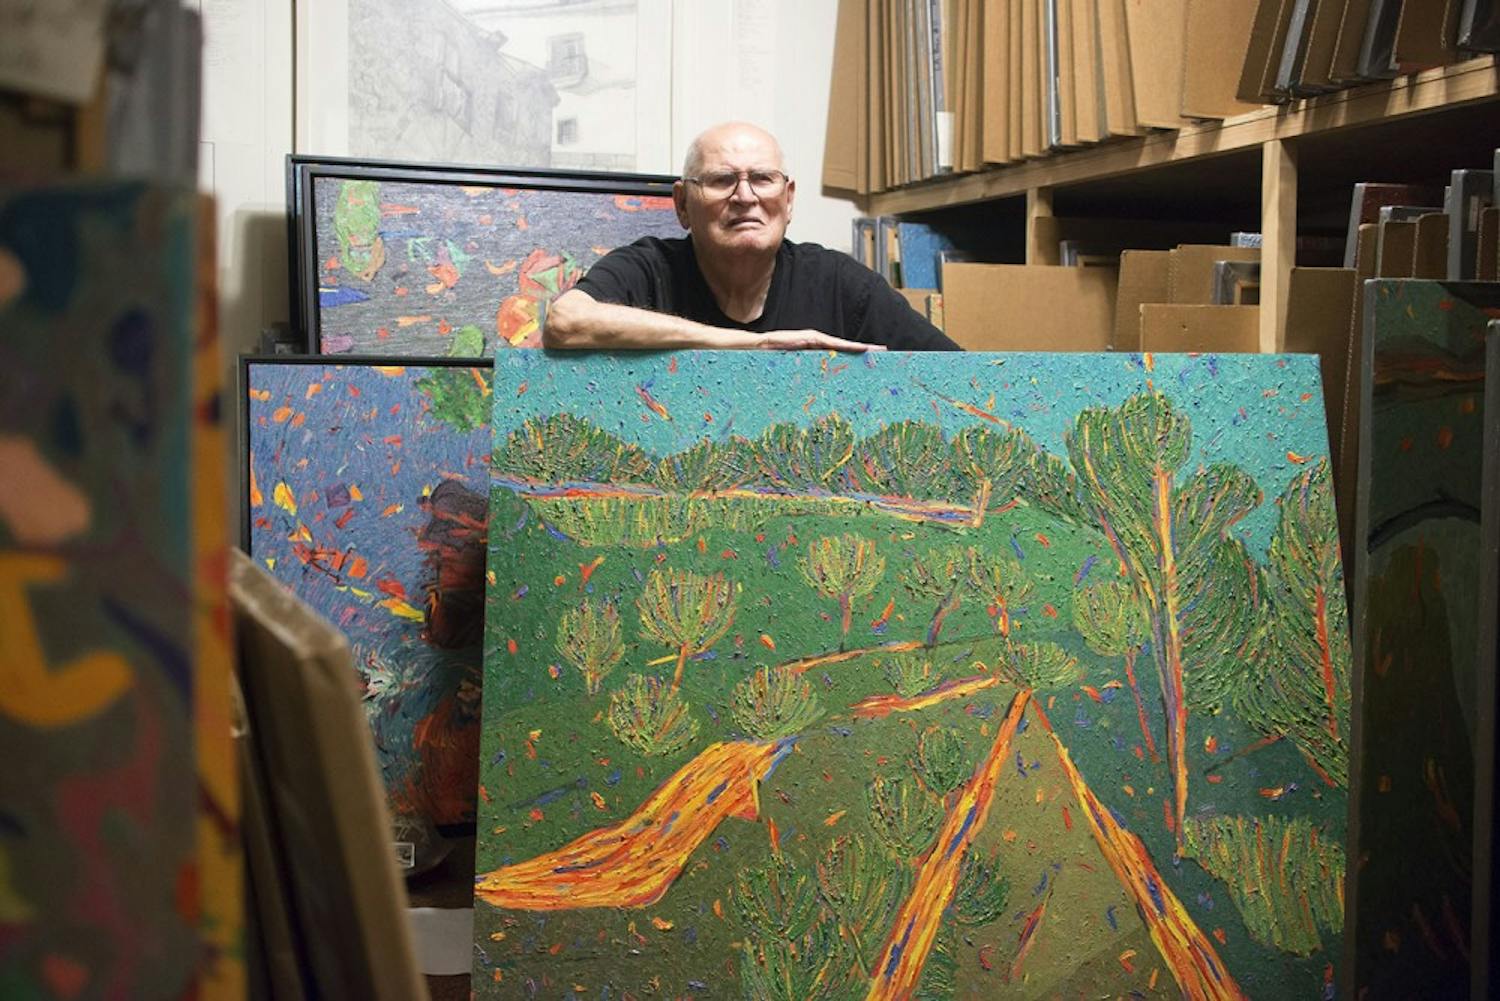 Marvin Saltzman poses with his artwork in his studio, located in Chapel Hill on July 22nd. A small portion of Saltzman's thousands of pieces is currently on display in the Eno Gallery in Hillsboro. 

"I draw from nature, and then I paint about nature."
"Bad teachers train, good teachers open doors."